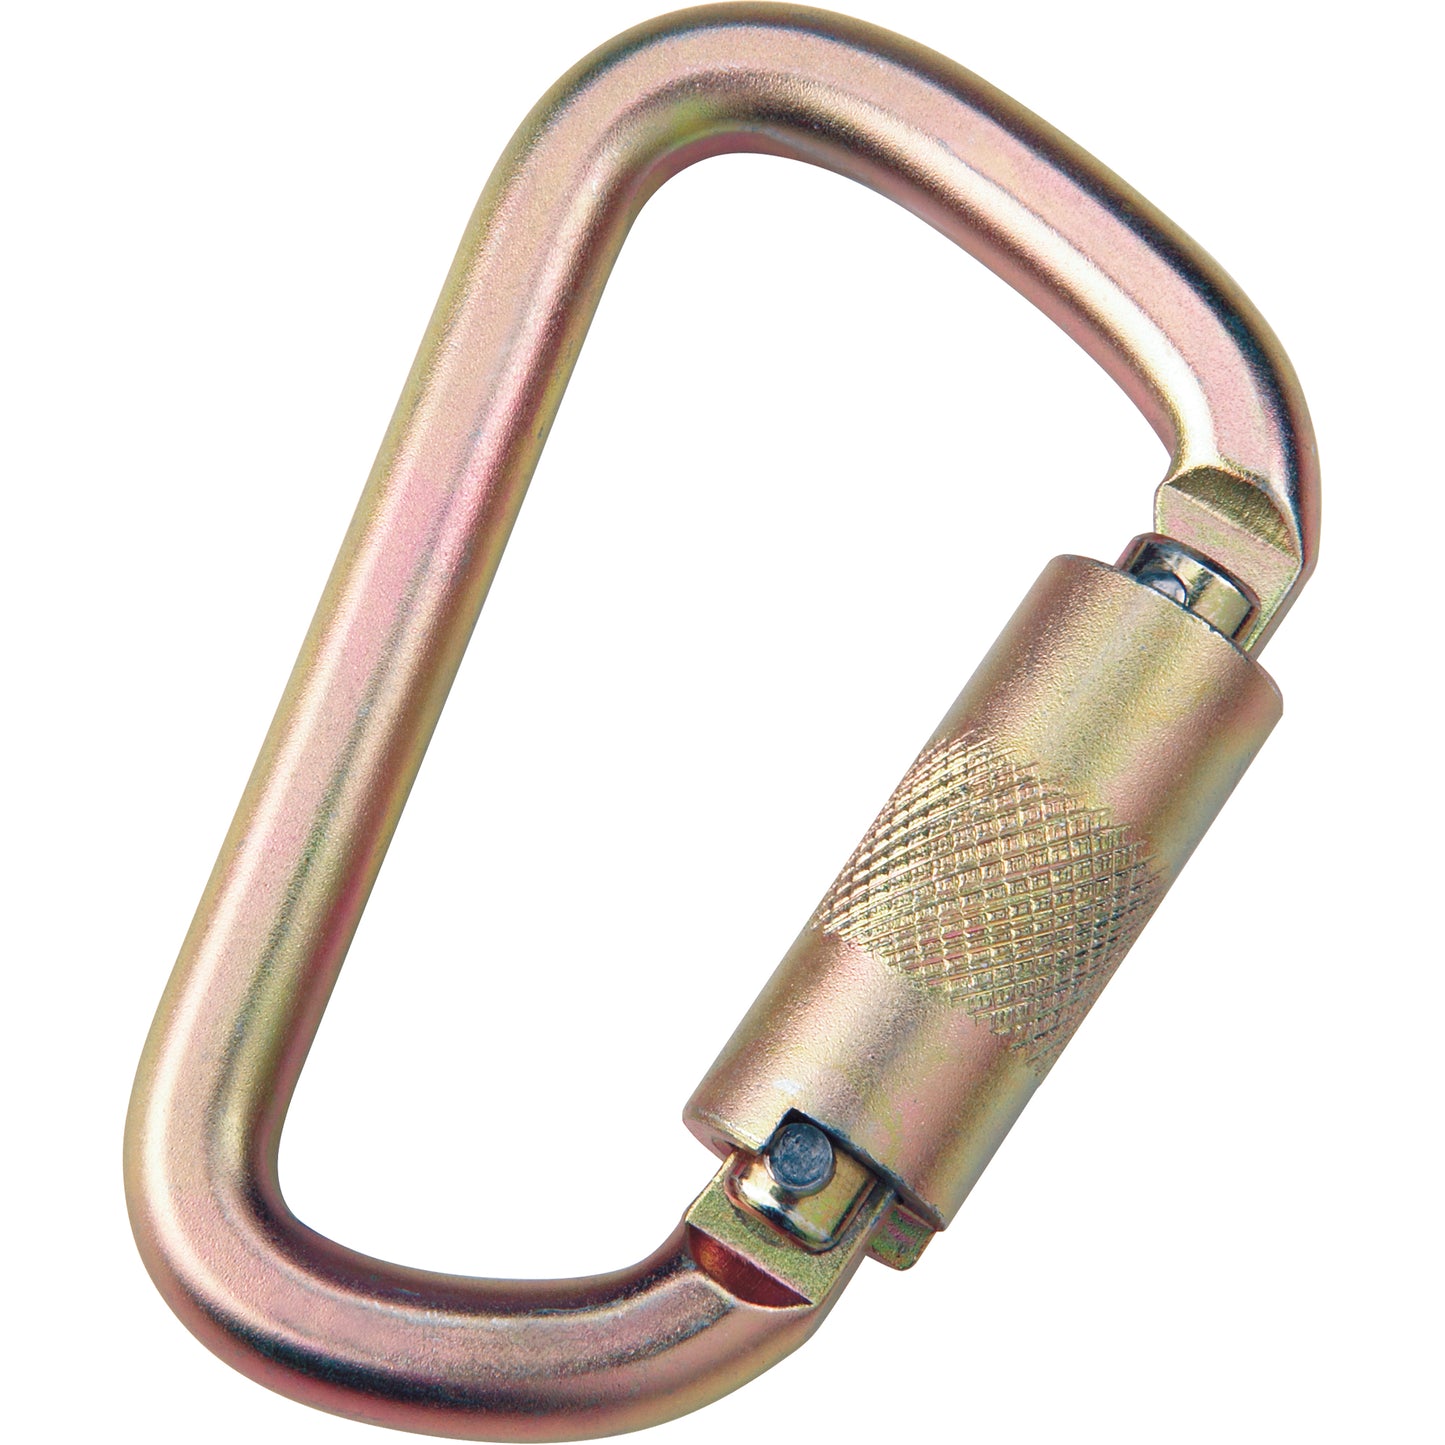 Anchorage Connecting Carabiners, Steel